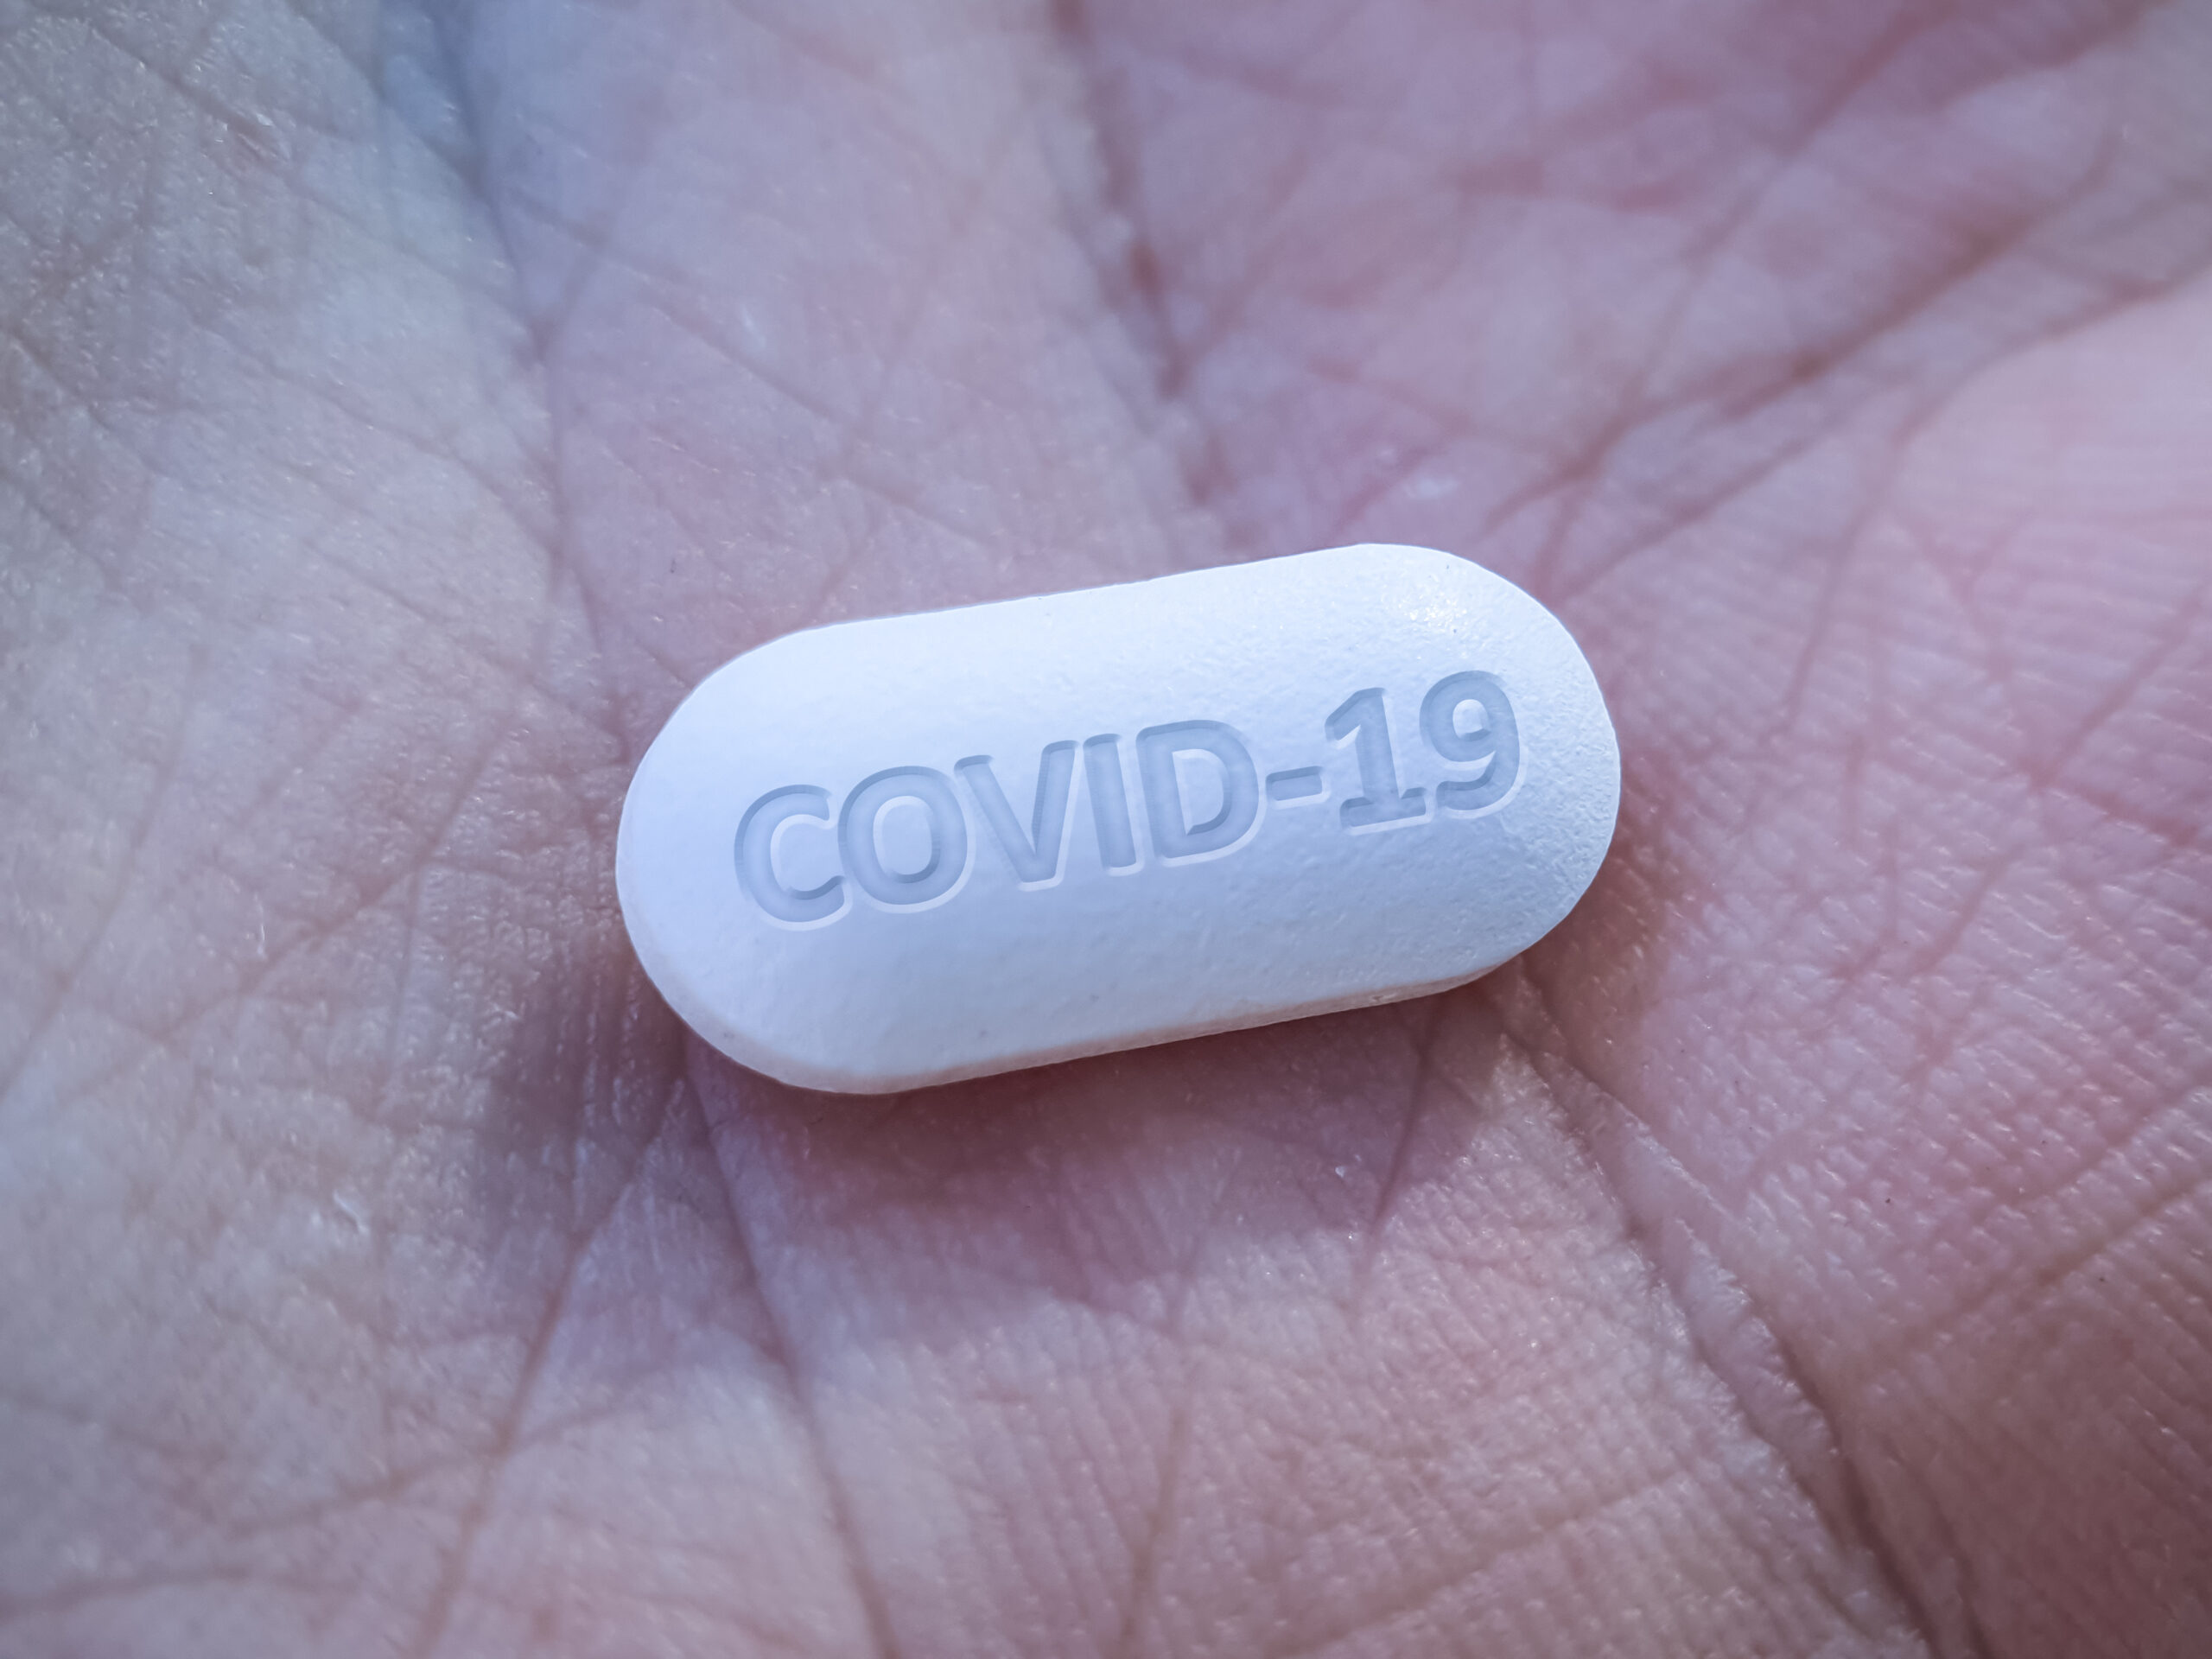 Proposal To Halt The COVID-19 Pandemic With Ivermectin